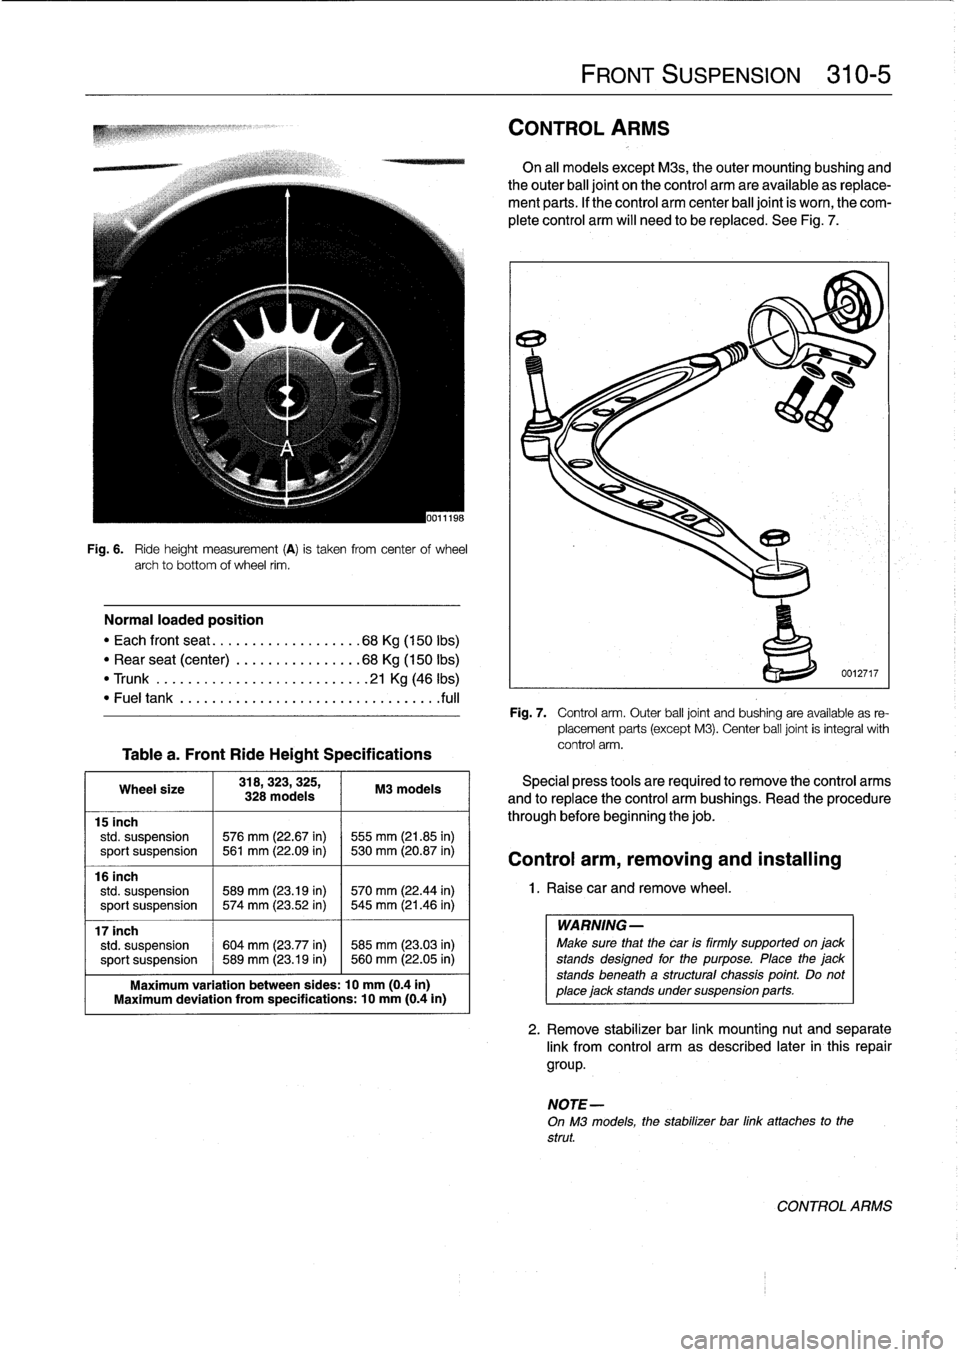 BMW 323i 1998 E36 Workshop Manual 
Fig
.
6
.

	

Ride
height
measurement
(A)
is
taken
from
centerof
wheel
archto
bottom
of
wheel
rim
.

Normal
loaded
position

"
Each
front
seat
...
...
.
..
..........
68Kg
(150
Ibs)

"
Rear
seat
(cen